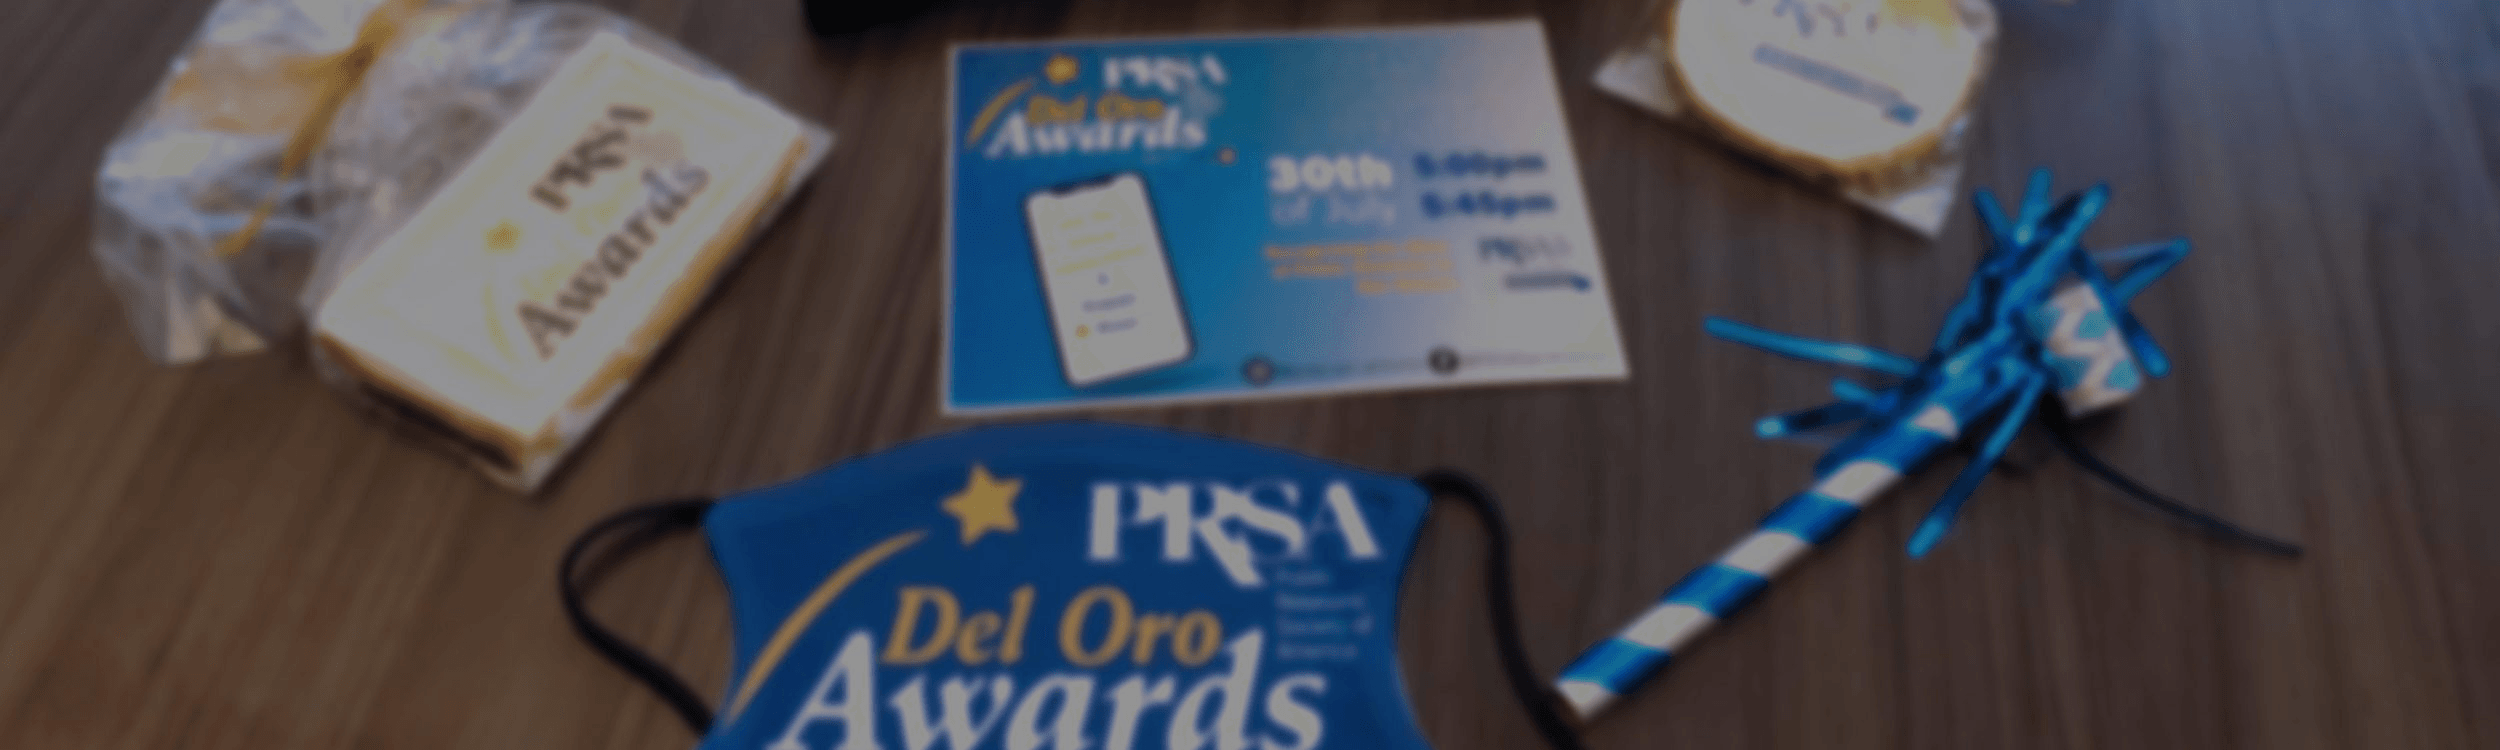 Noisy Trumpet Brings Home Two PRSA Awards